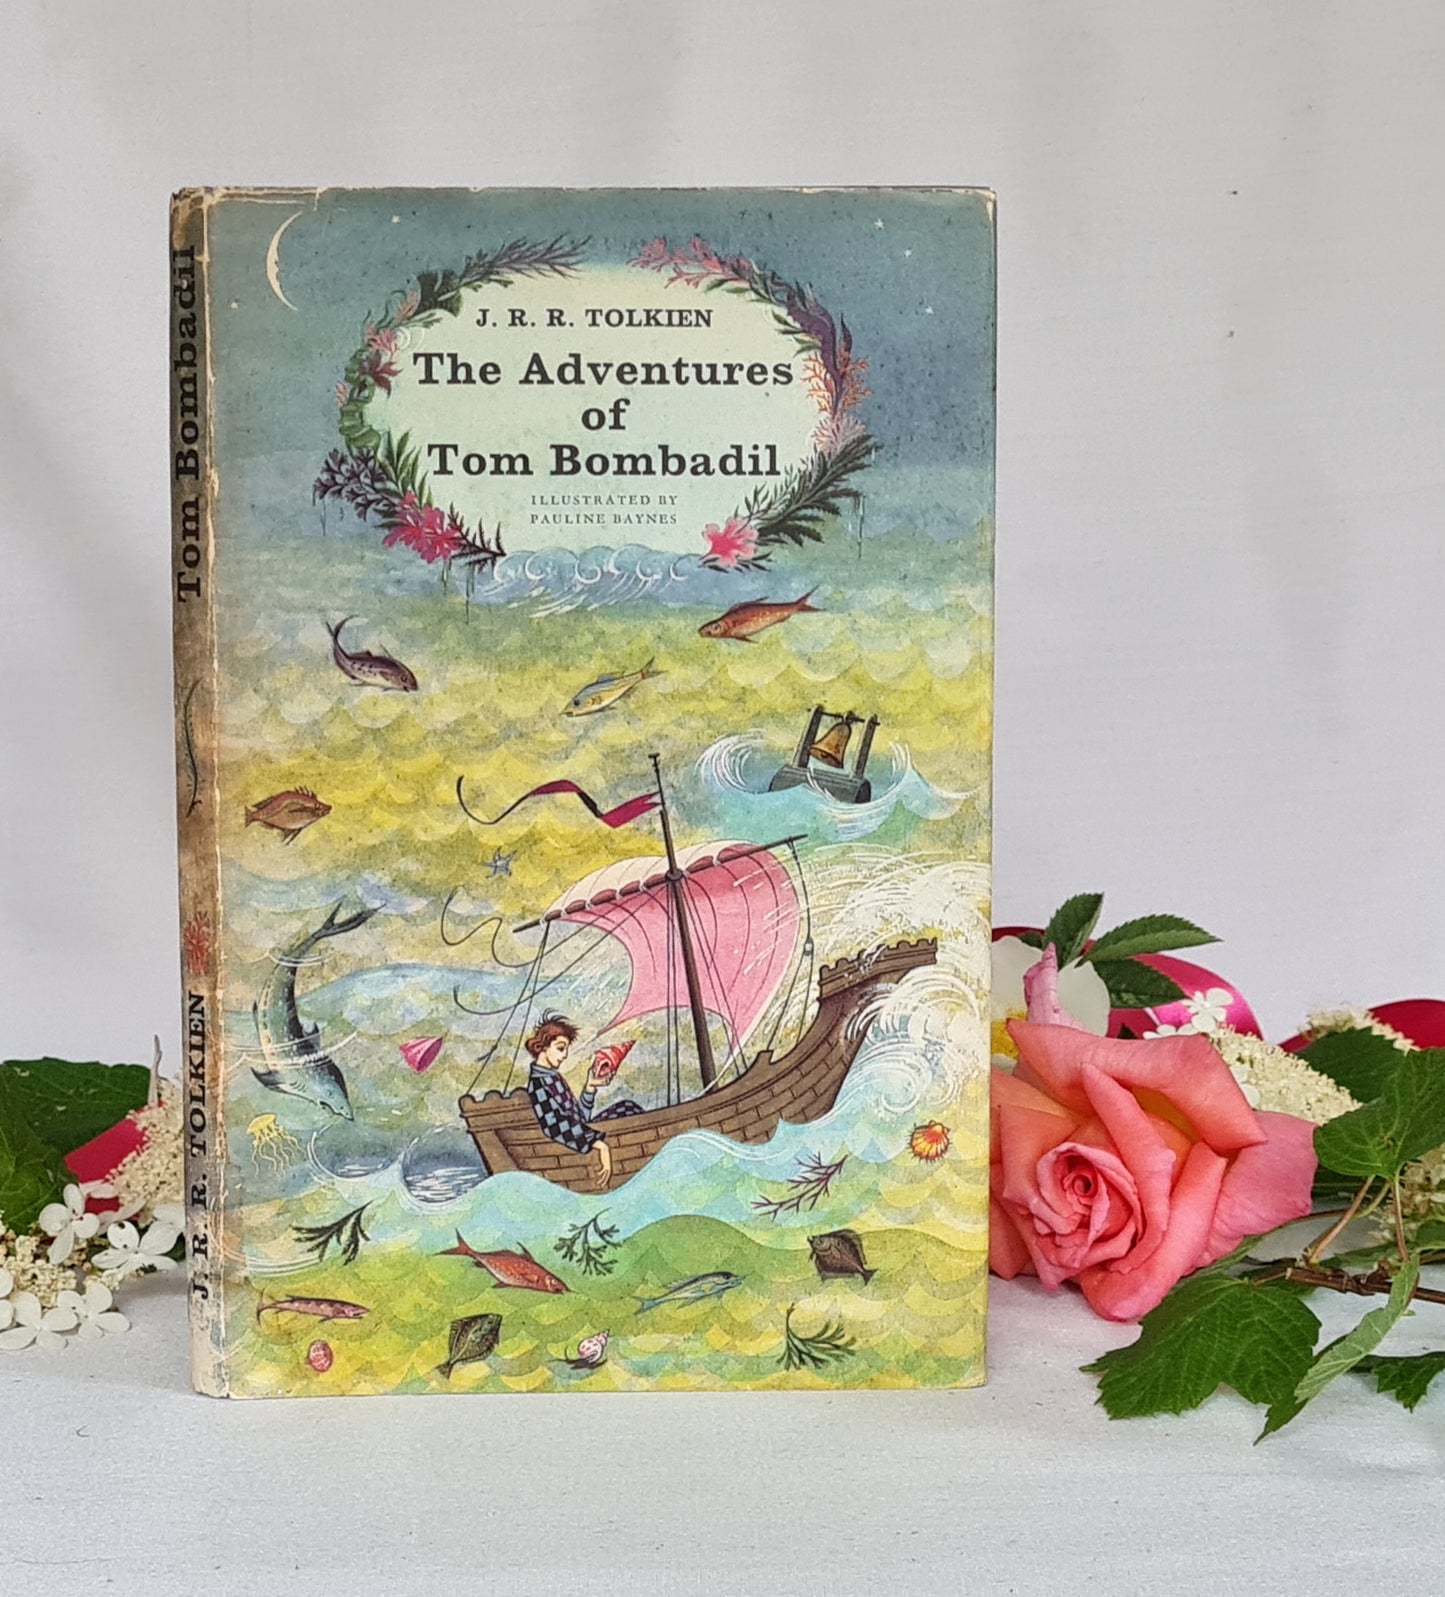 1962 FIRST EDITION The Adventures of Tom Bombadil and Other Verses From the Red Book by JRR Tolkien / Illustrated / Good Condition / Jacket